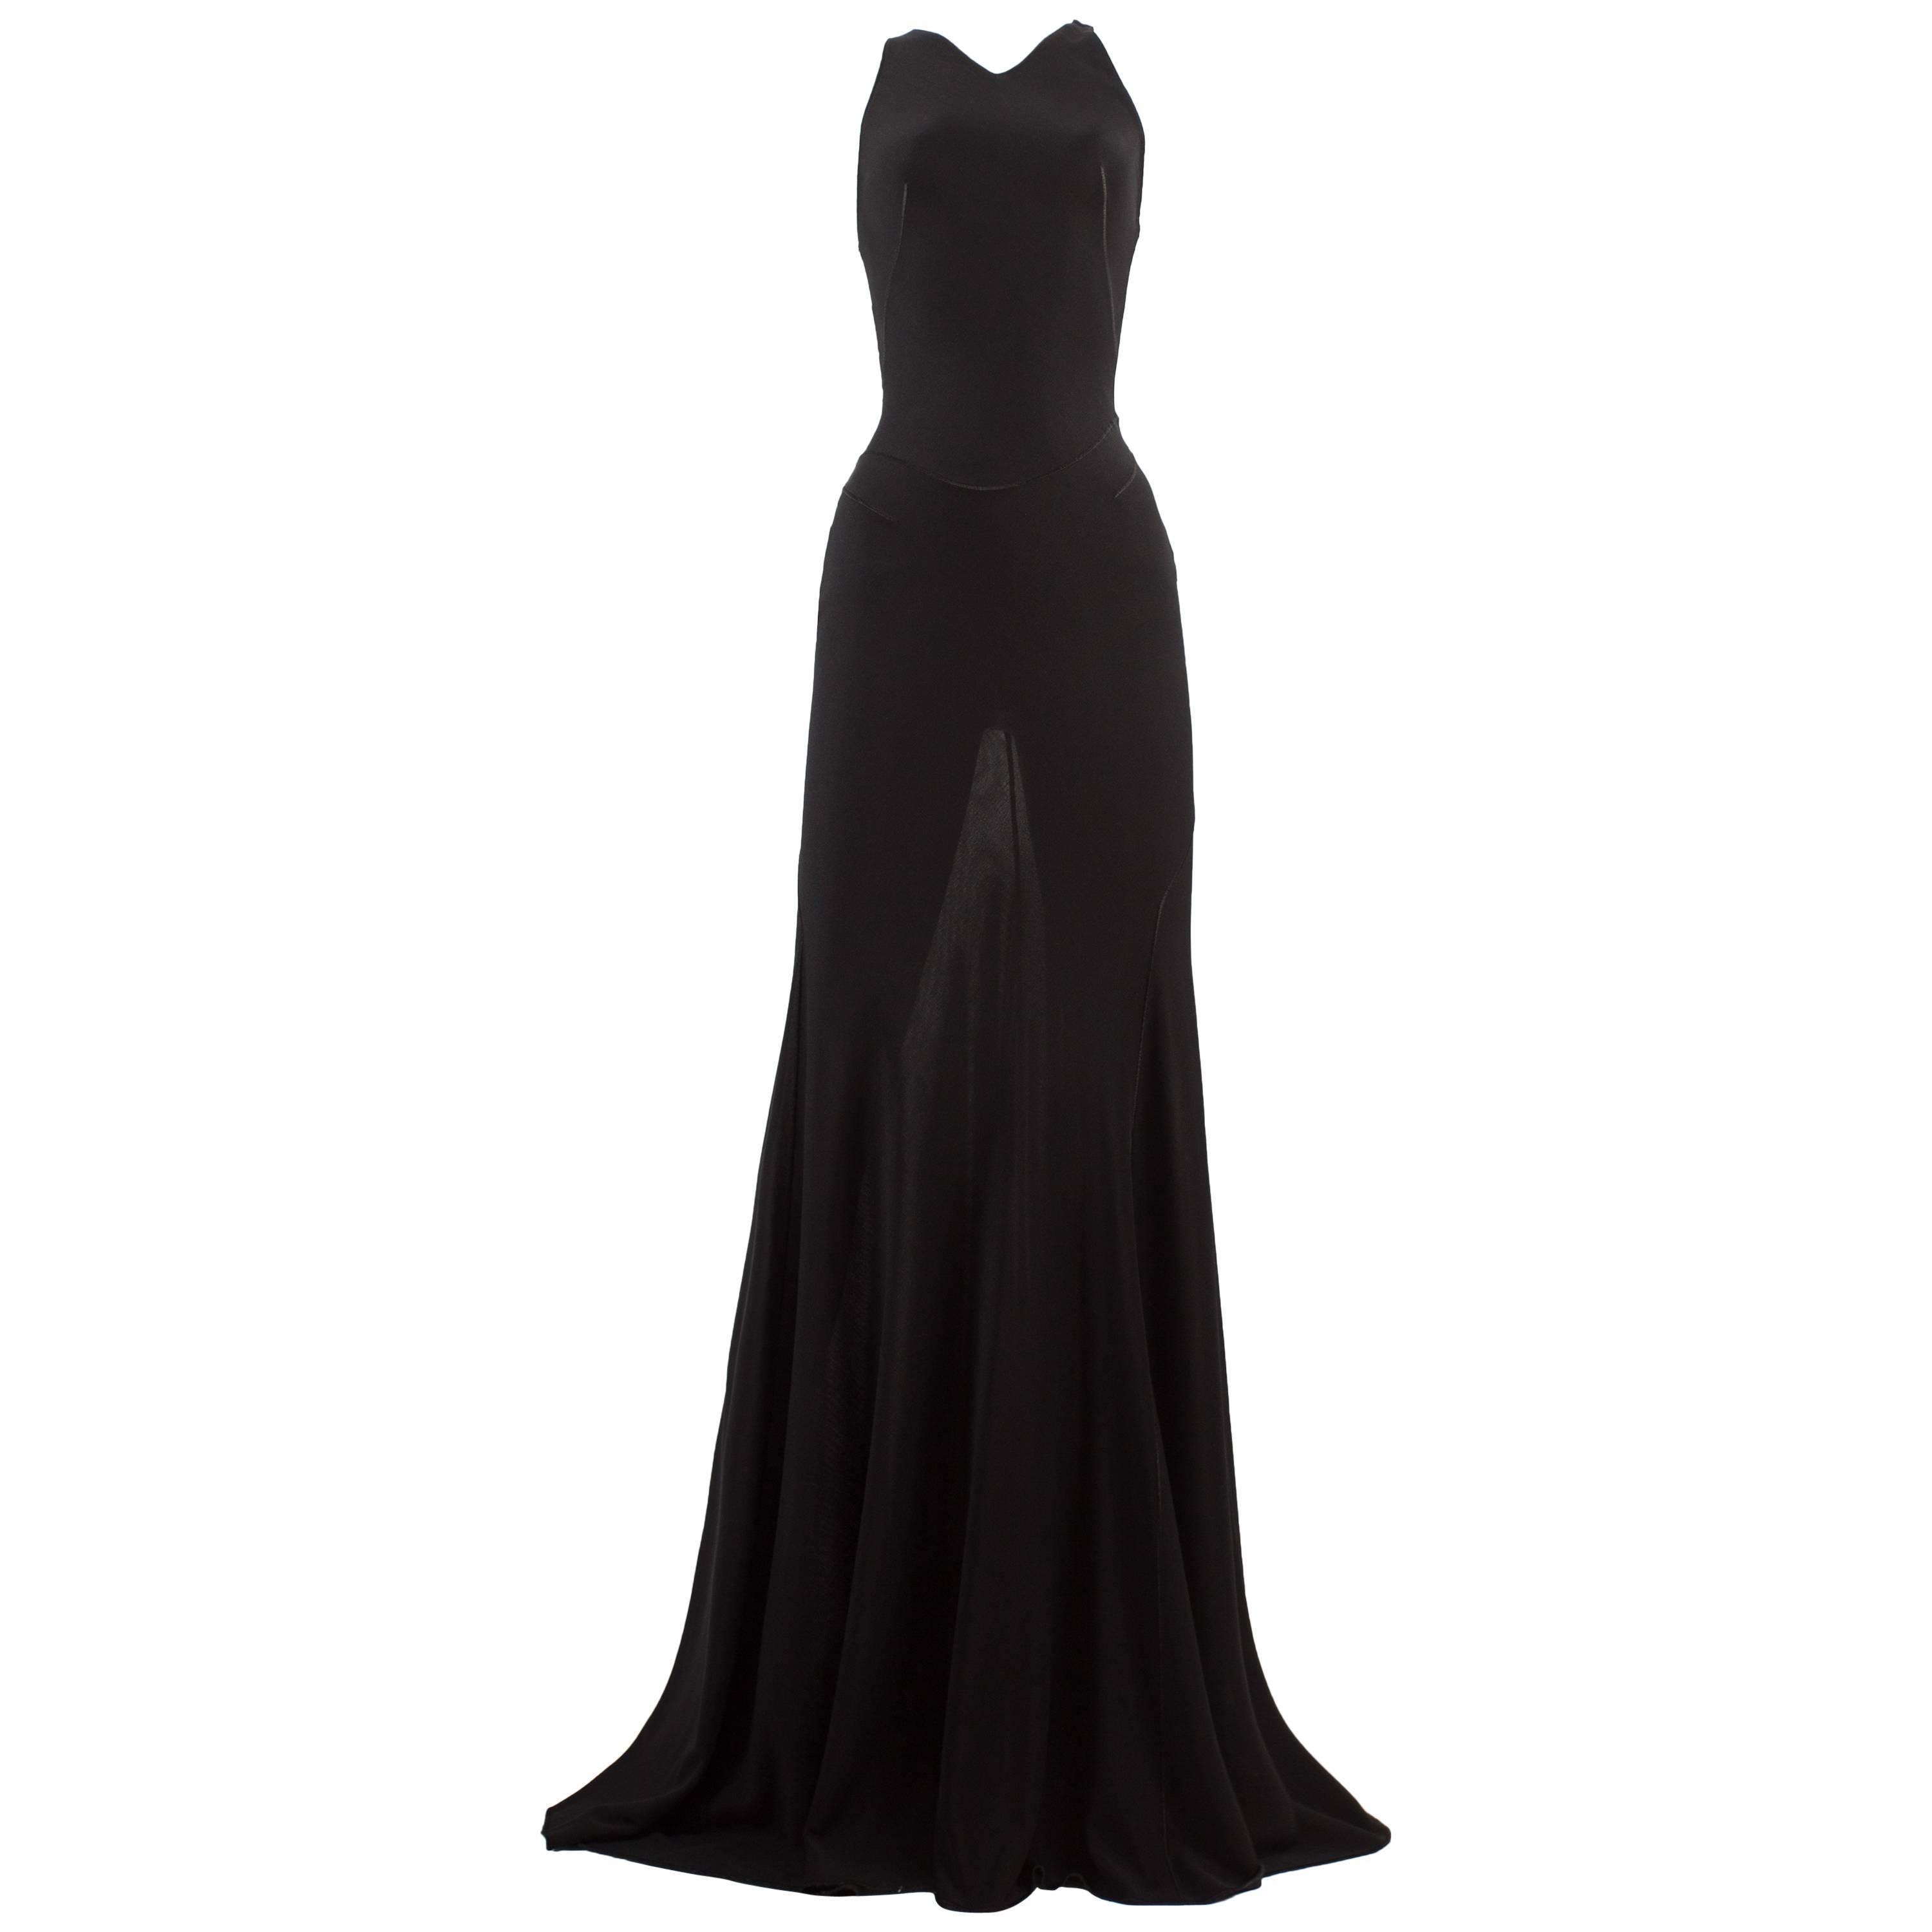 Alaia couture black full length knitted evening gown, Autumn-Winter 2001 